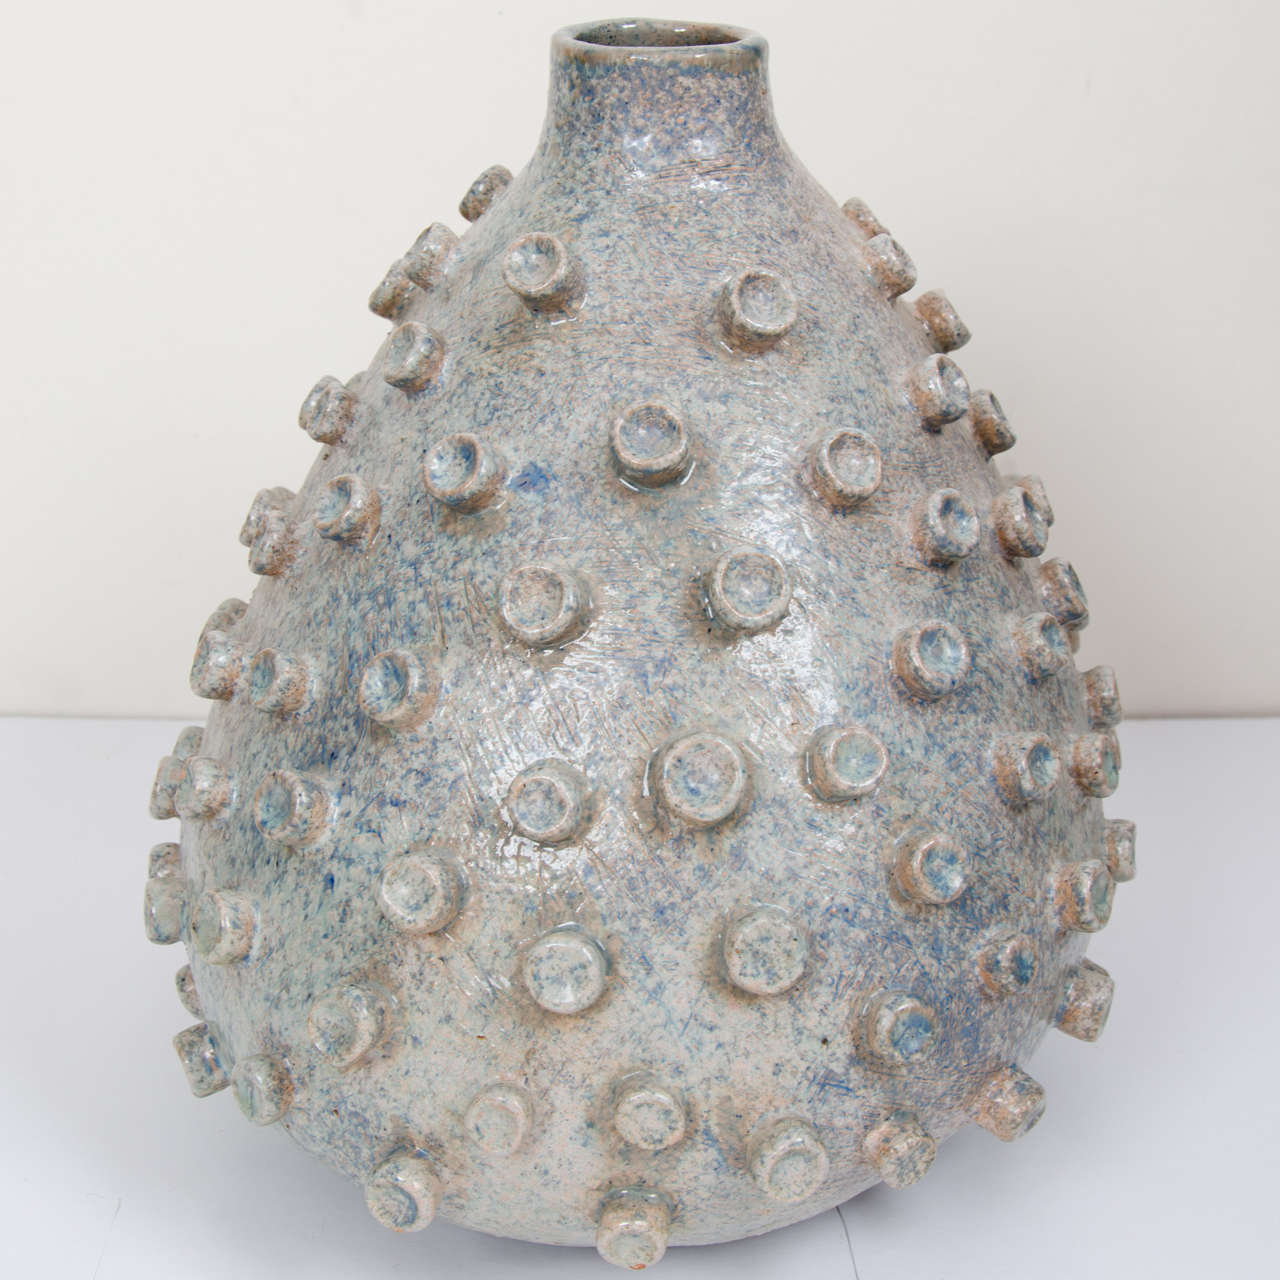 The handmade stoneware vase has a round bulbous shape that is asymmetrical with a narrow funnel opening. The surface of the vessel is covered in round rings emphasizing its organic form.